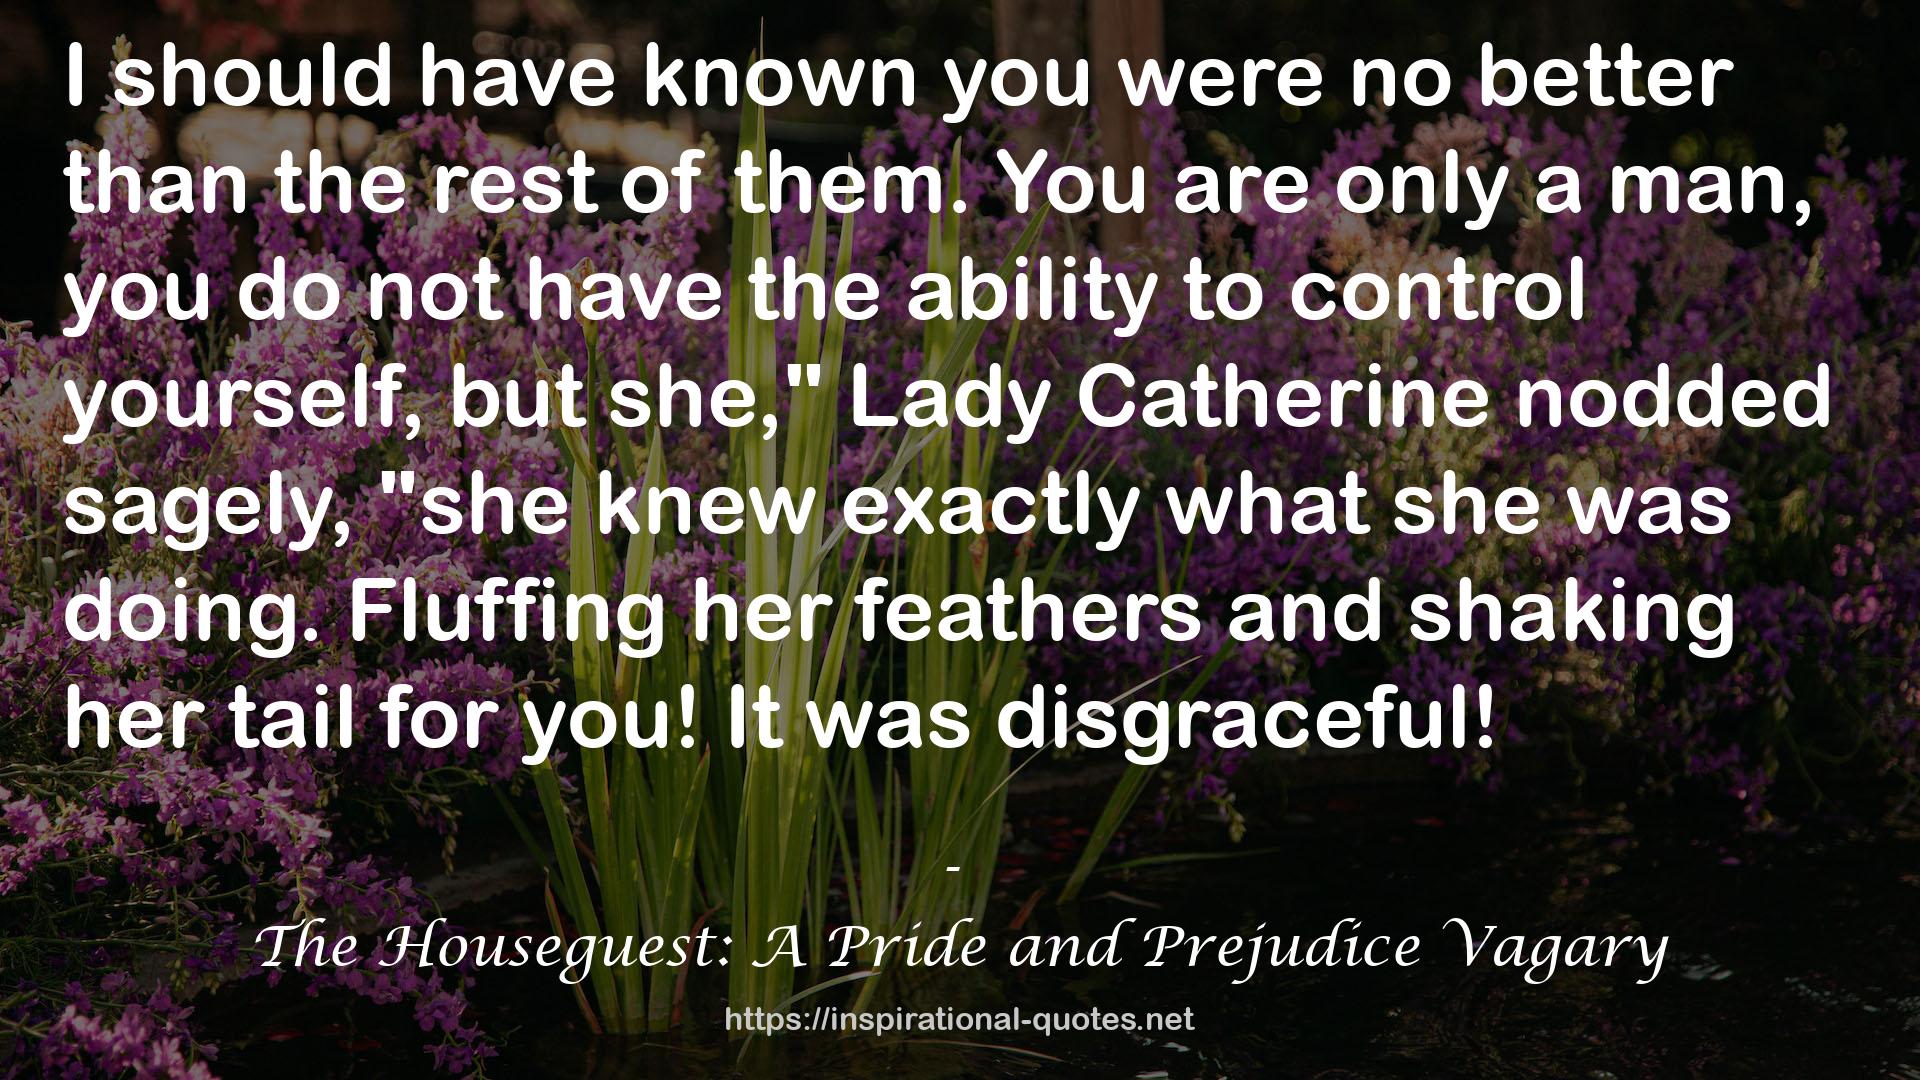 The Houseguest: A Pride and Prejudice Vagary QUOTES